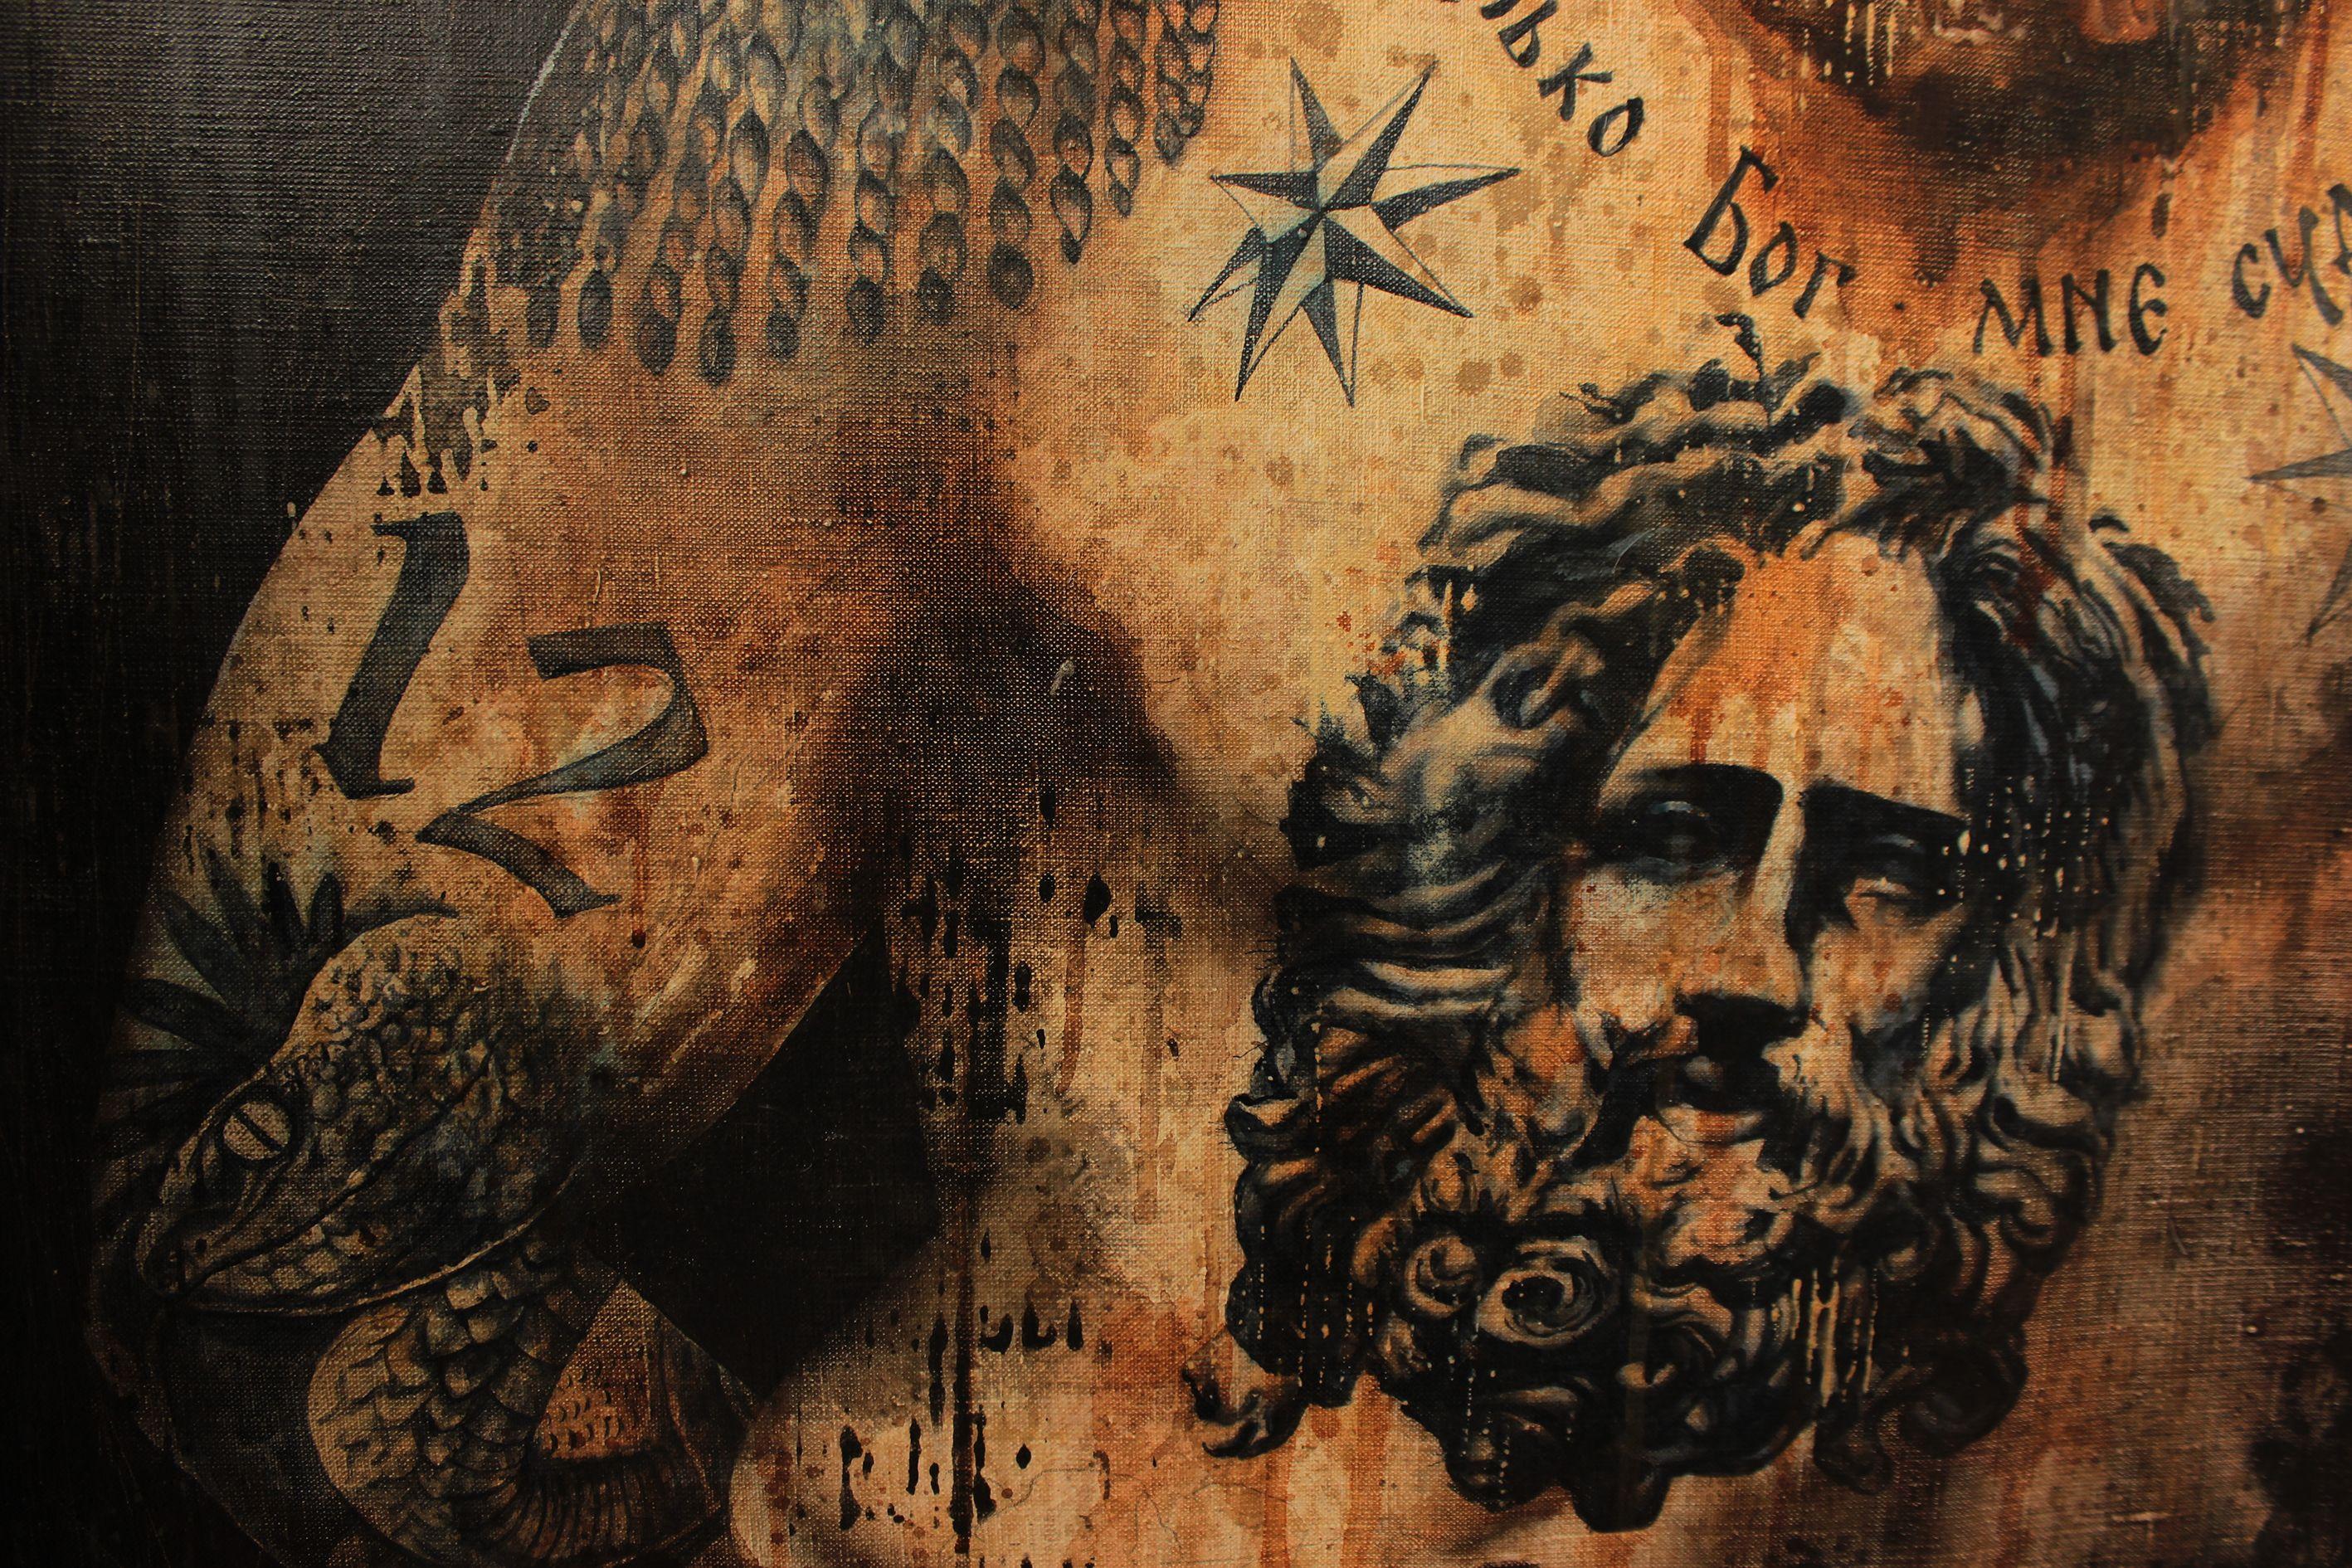 The painting depicts Hercules with tattoos of his exploits and a portrait of his father, Zeus. Hercules is the biggest bully of antiquity, but at the same time he is protected by his father.The inscription on the body translates as 